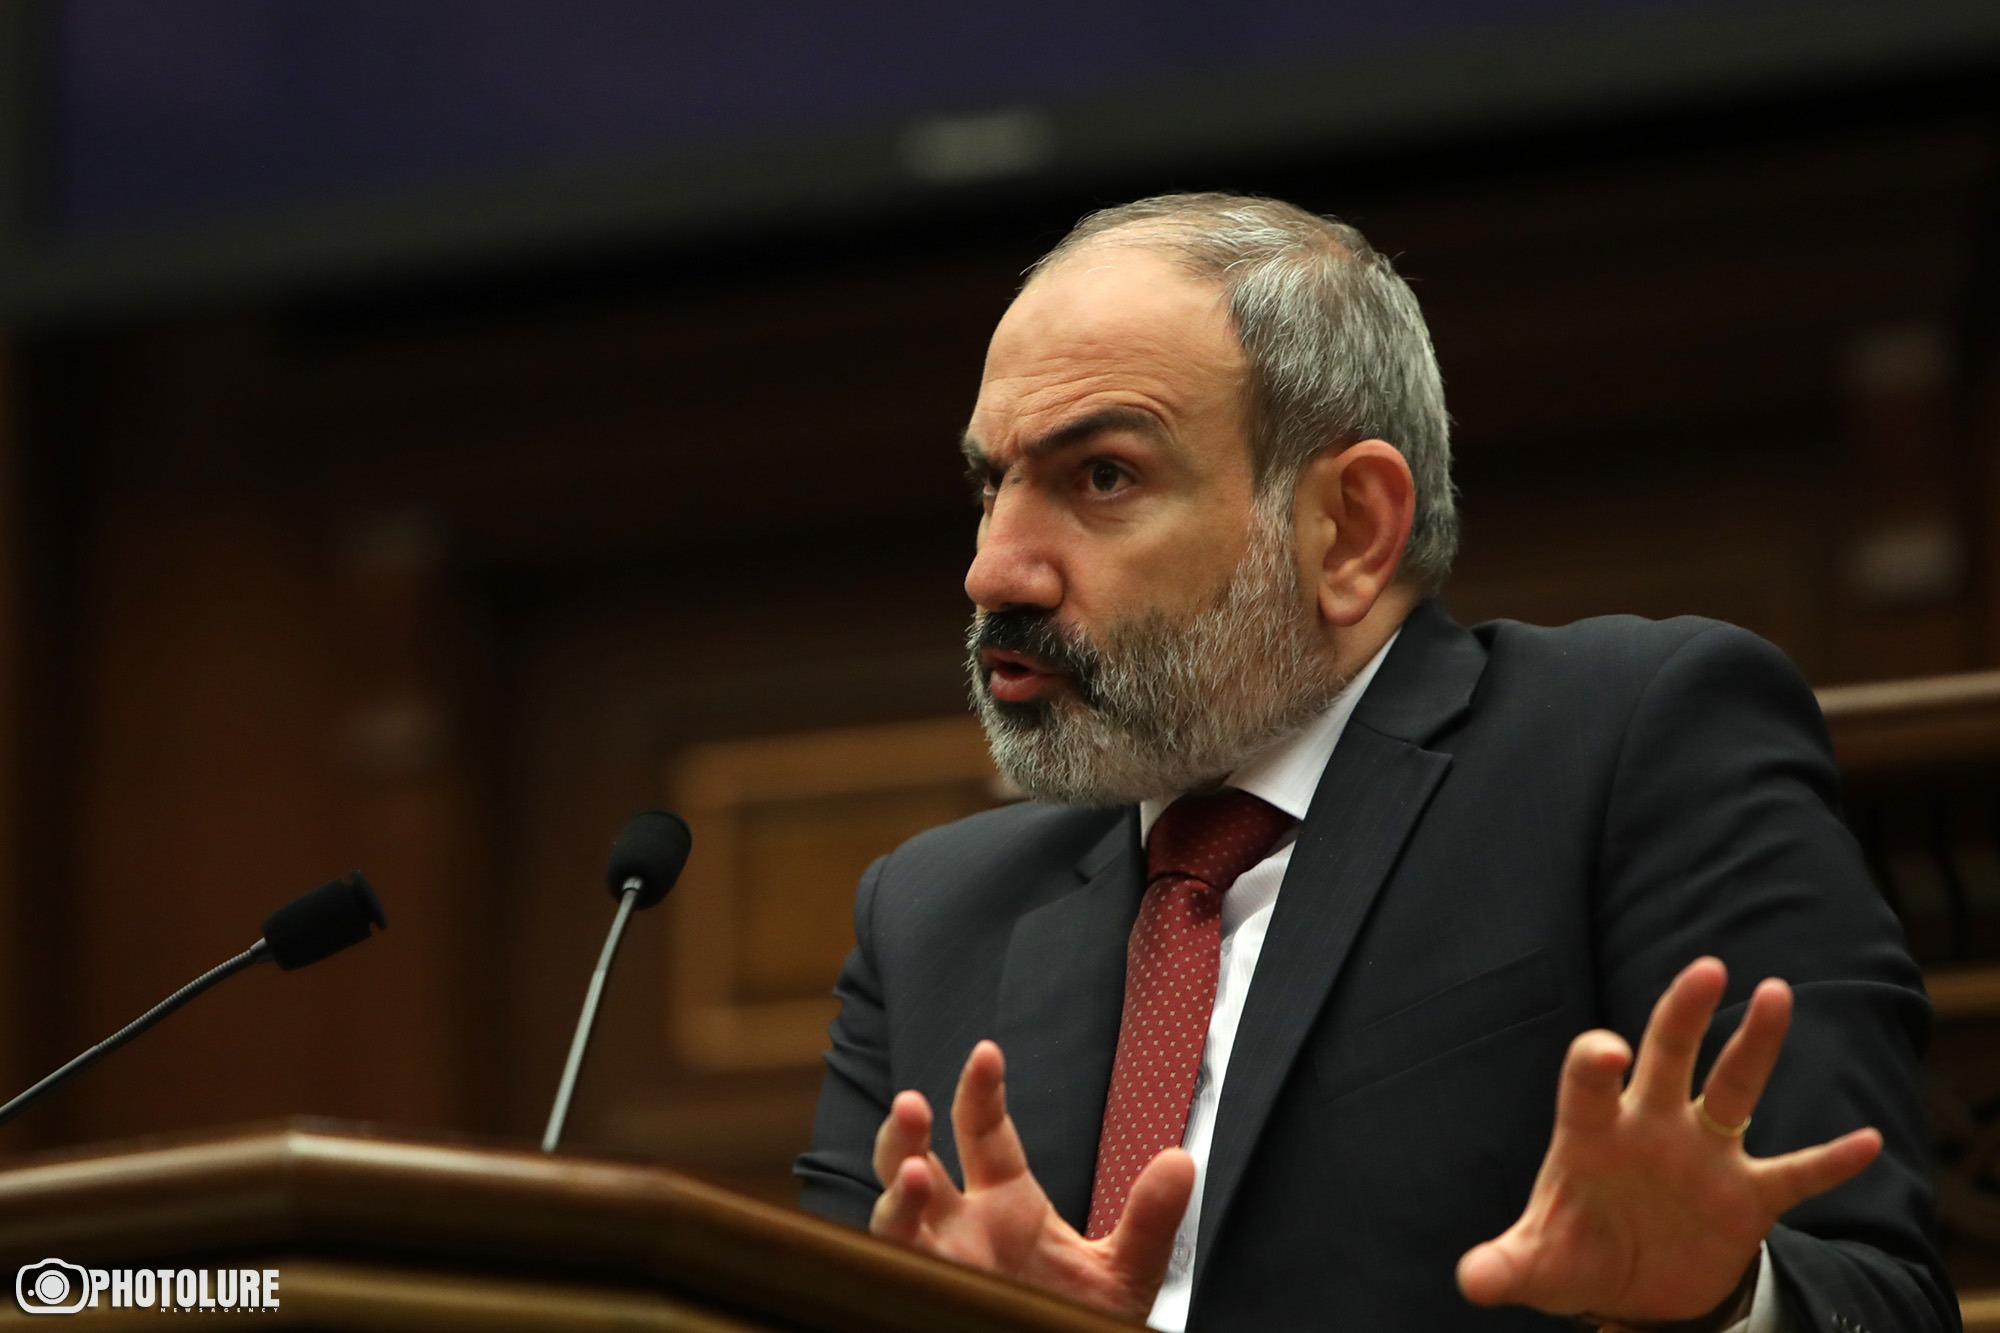 Pashinyan says Armenia is ready to normalize relations with Turkey without preconditions